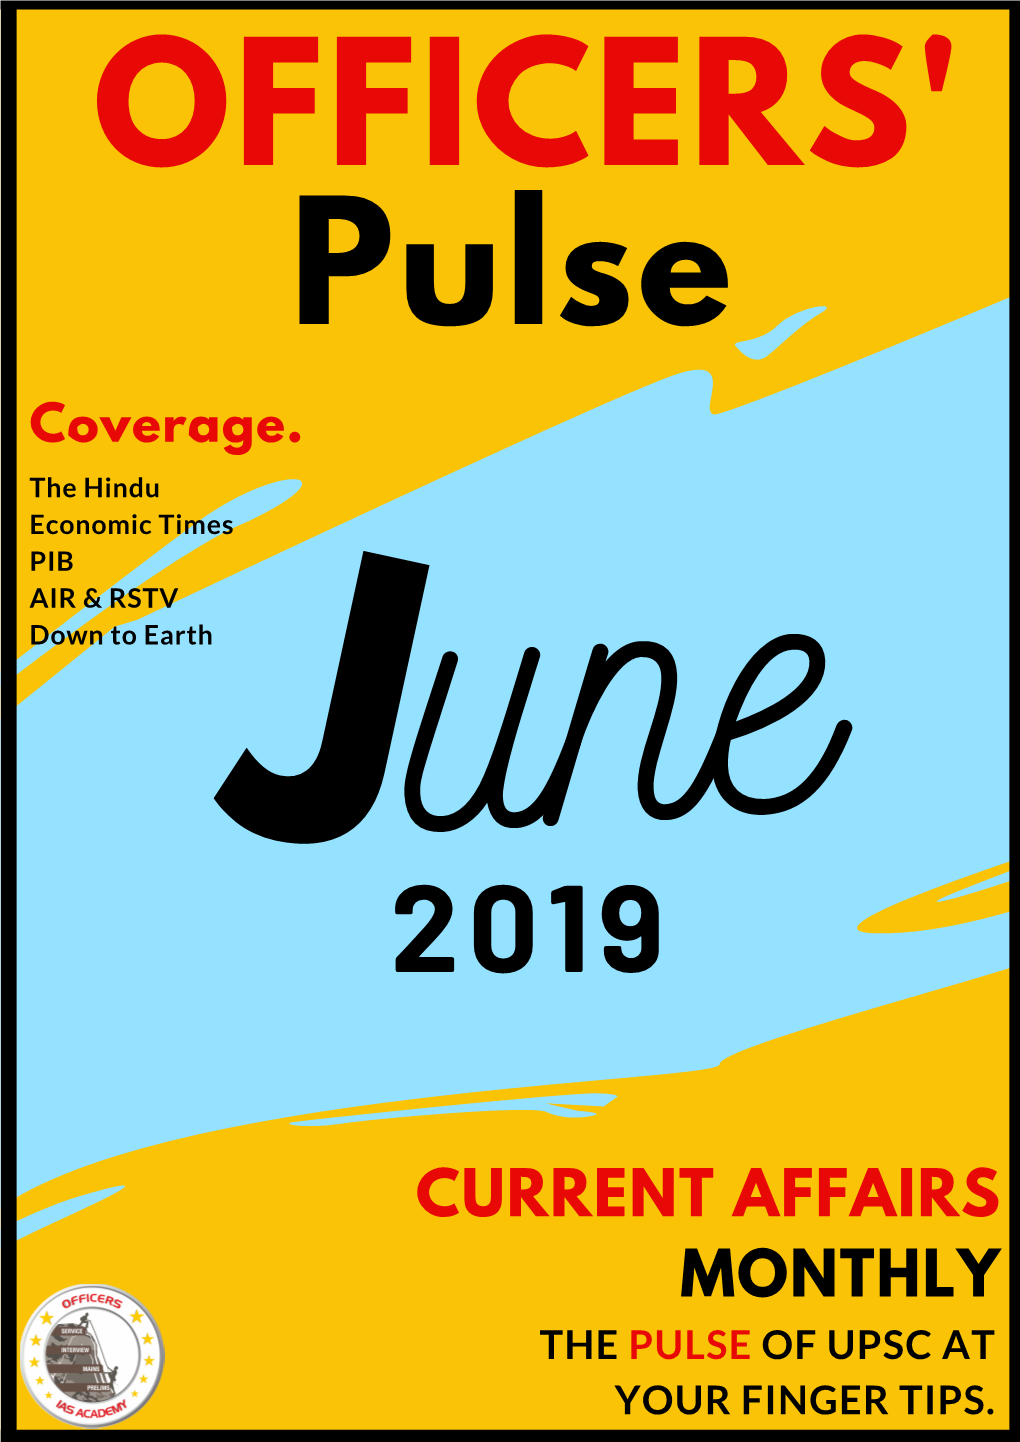 Current Affairs Monthly the Pulse of Upsc at Your Finger Tips